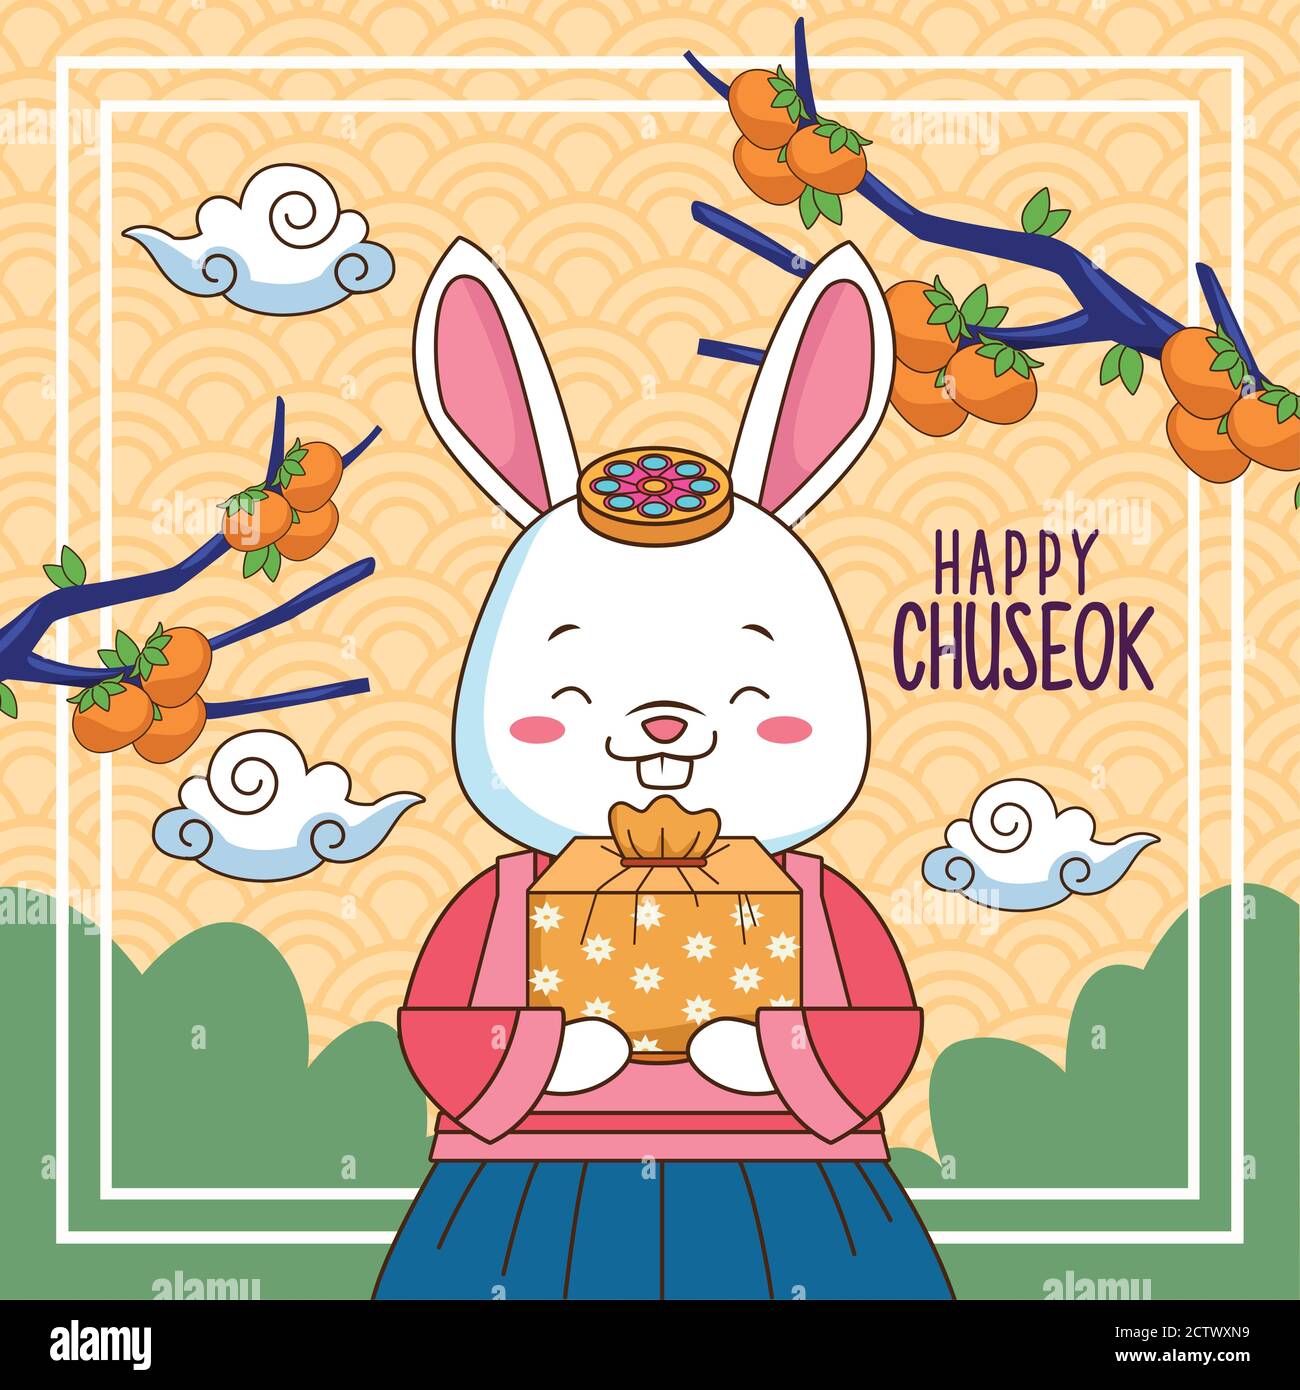 happy chuseok celebration with rabbit lifting gift and branches trees vector illustration design Stock Vector